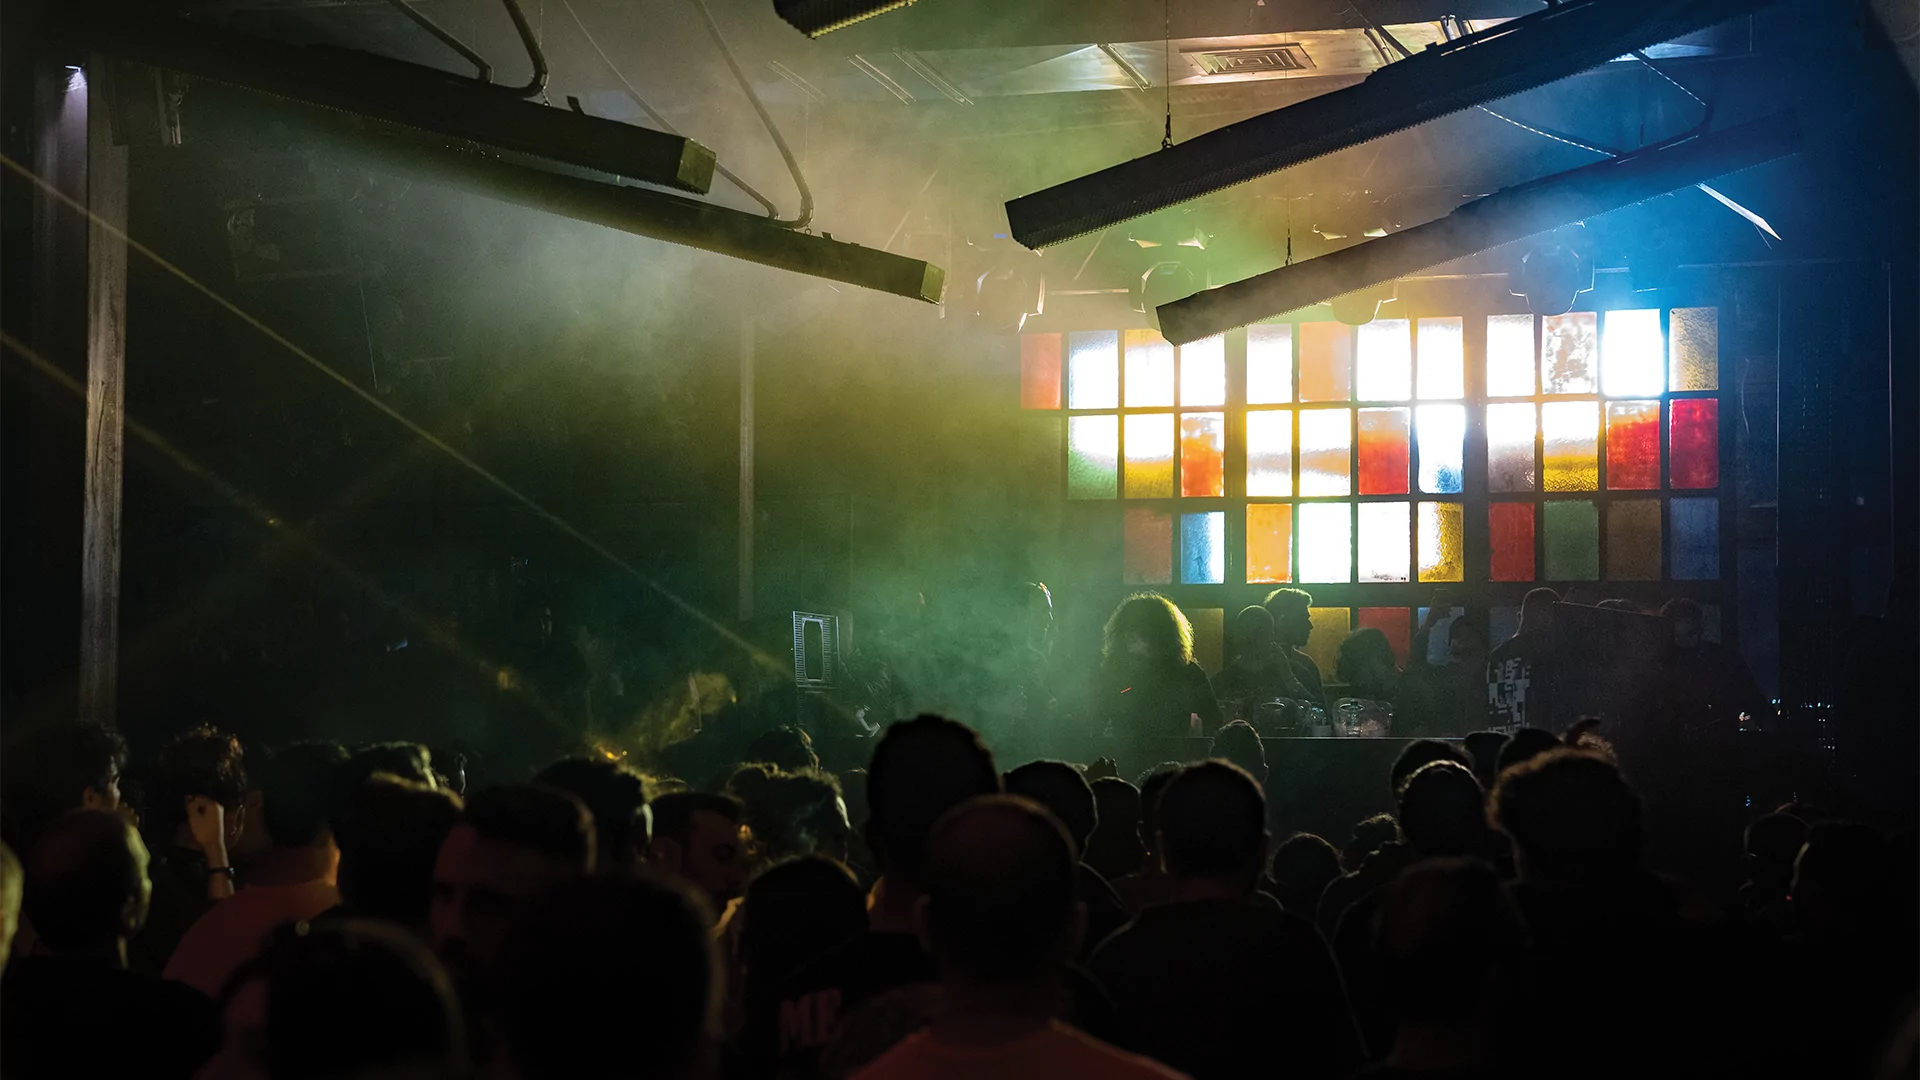 Inside The Grand Factory during a club night with light shining through stained glass windows